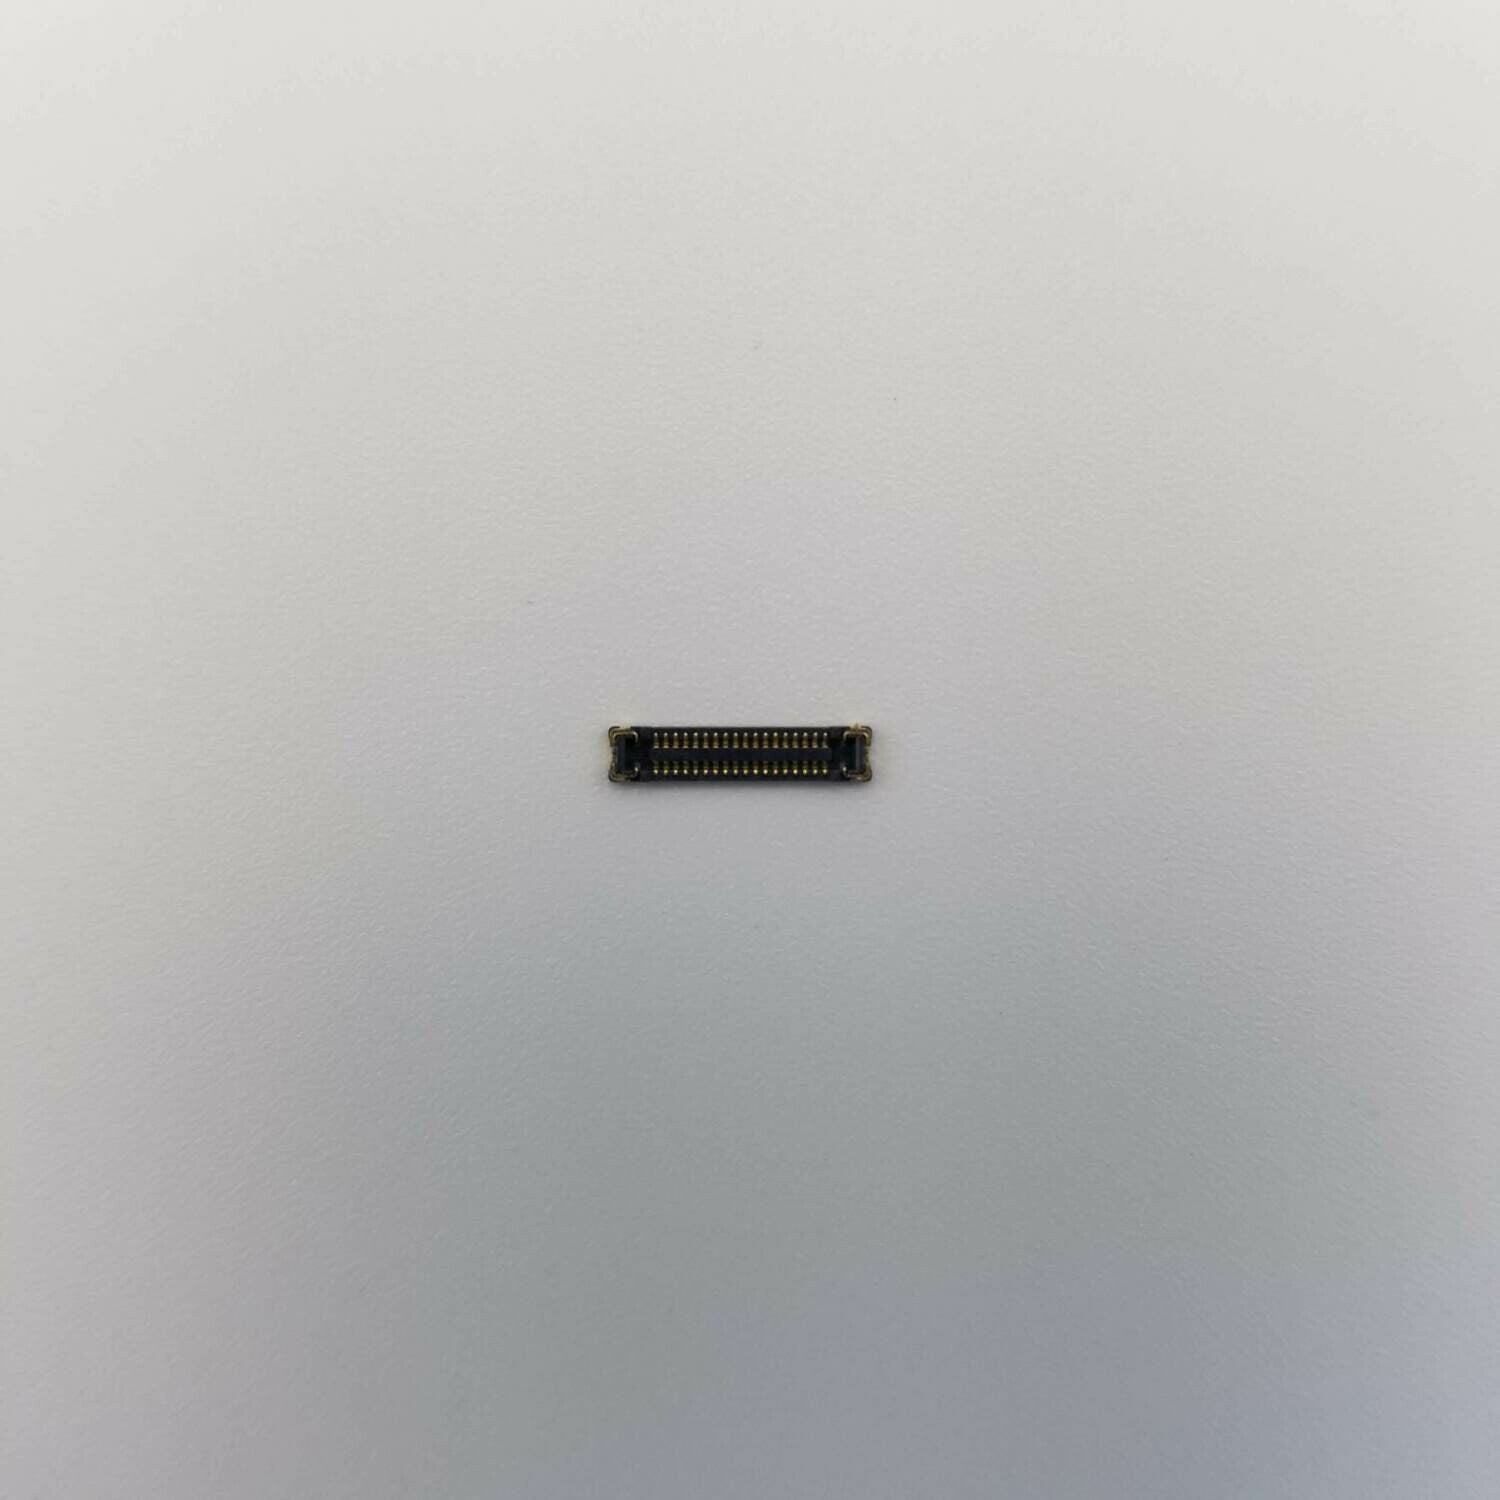 iPhone 6 / 6+ / 6s / 6s+ Front Camera Connector